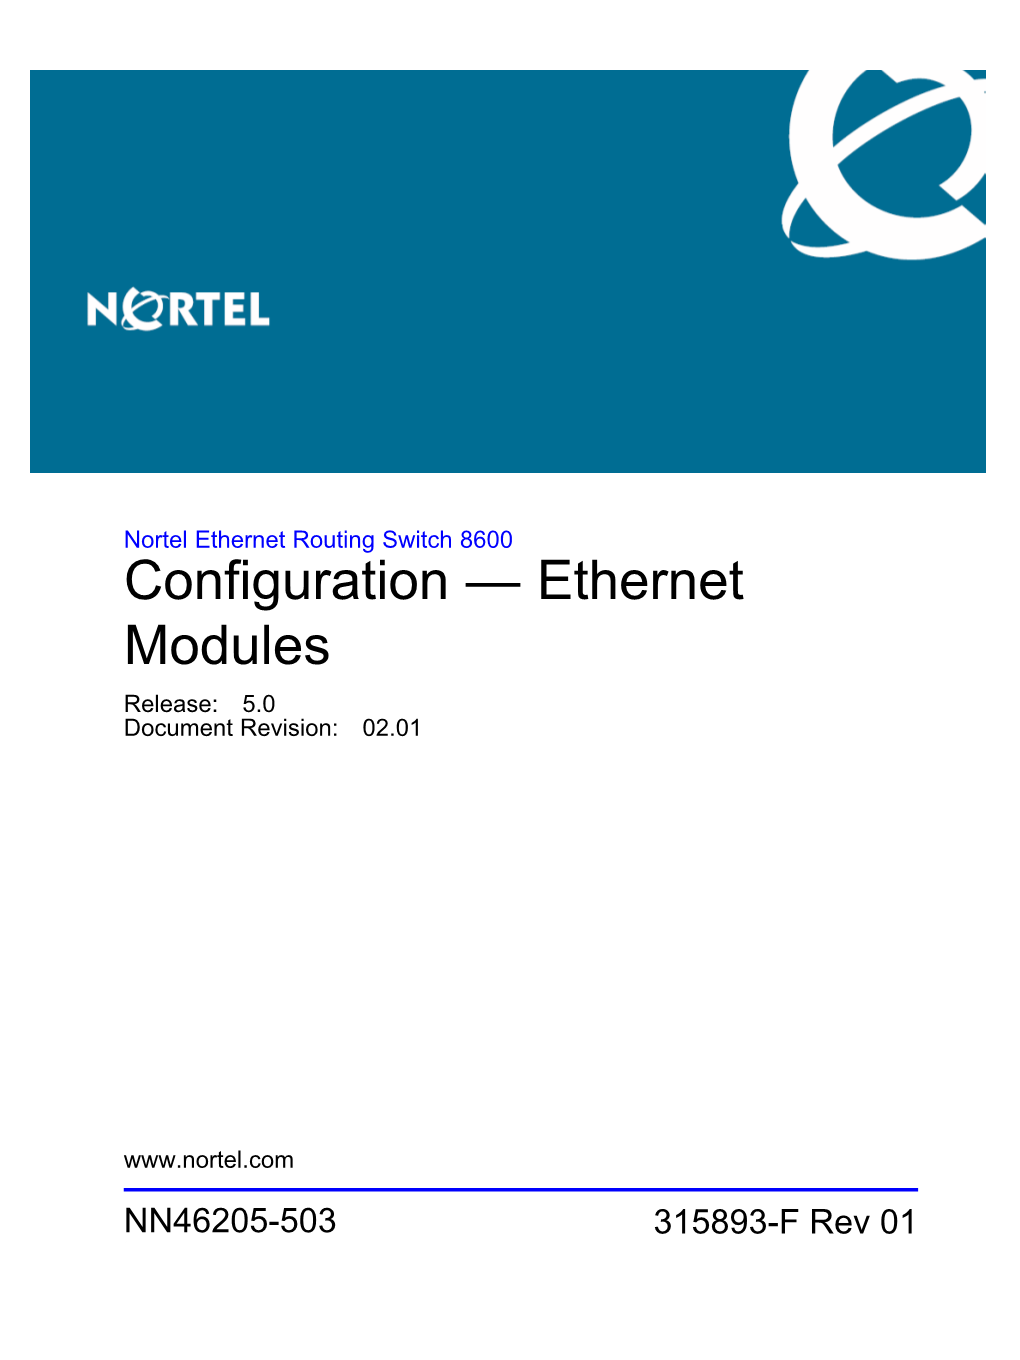 Ethernet Routing Switch 8600 Configuration — Ethernet Modules Release: 5.0 Document Revision: 02.01